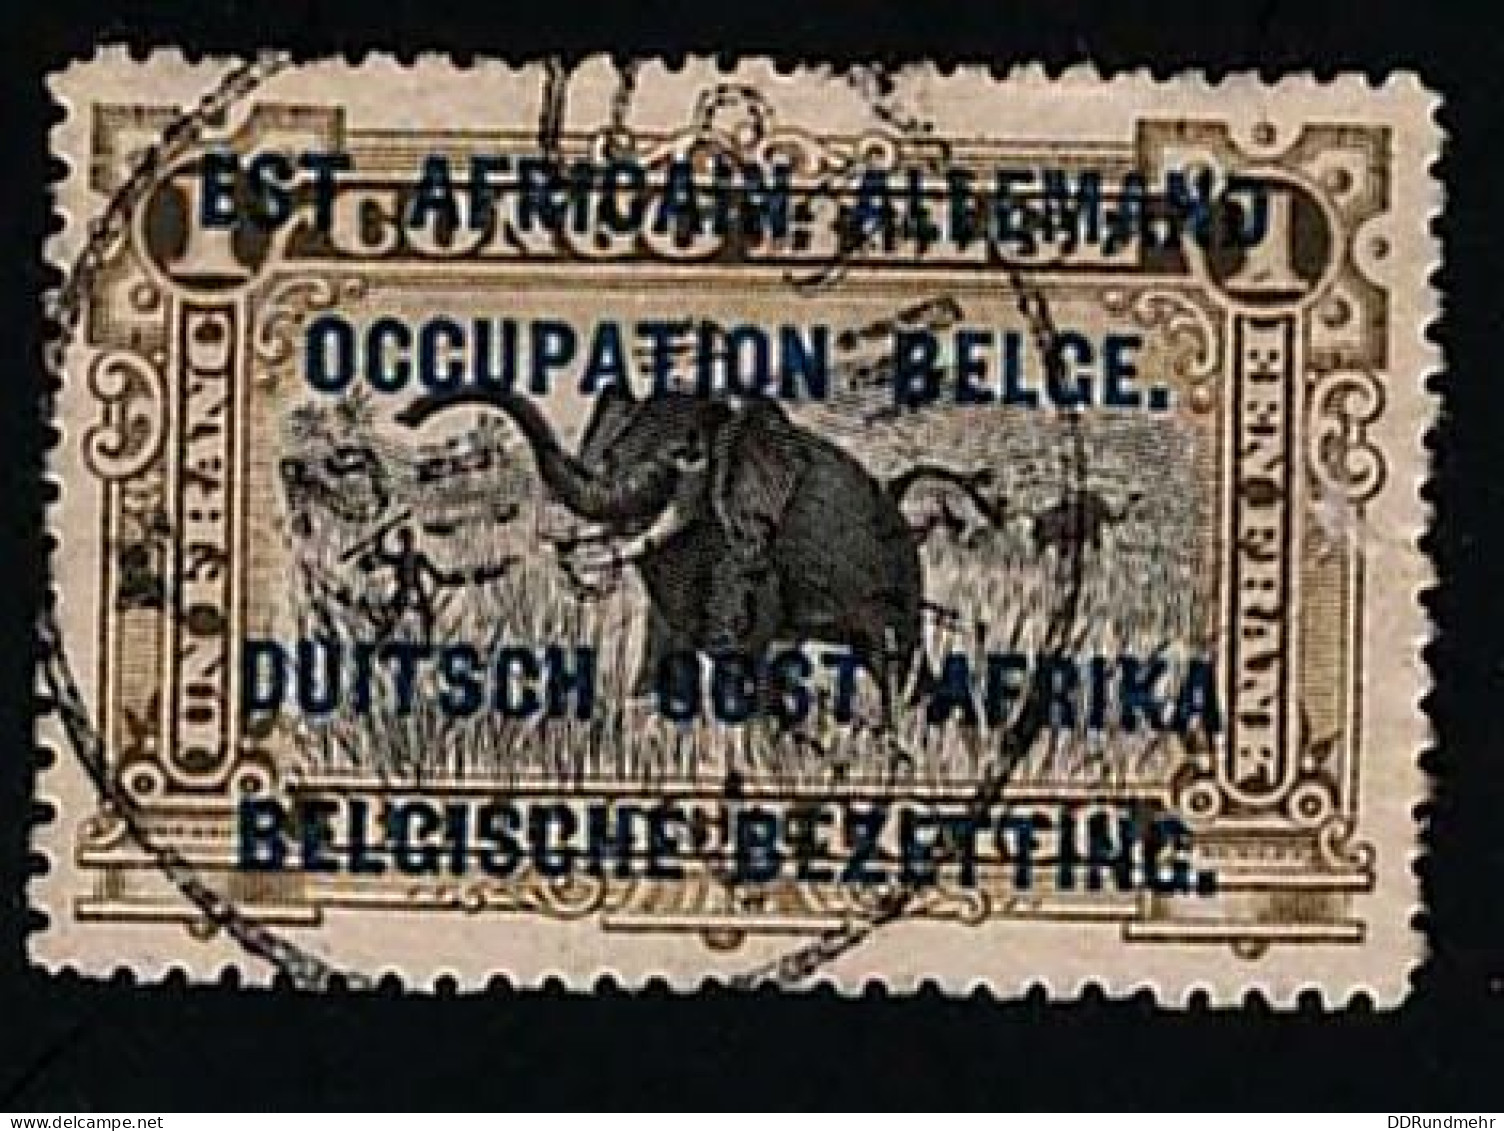 1916 African Elephant  Michel DR-OA OC7 Stamp Number DR-OA N23 Yvert Et Tellier RW-U 34 Stanley Gibbons RW-U 21 Used - Used Stamps